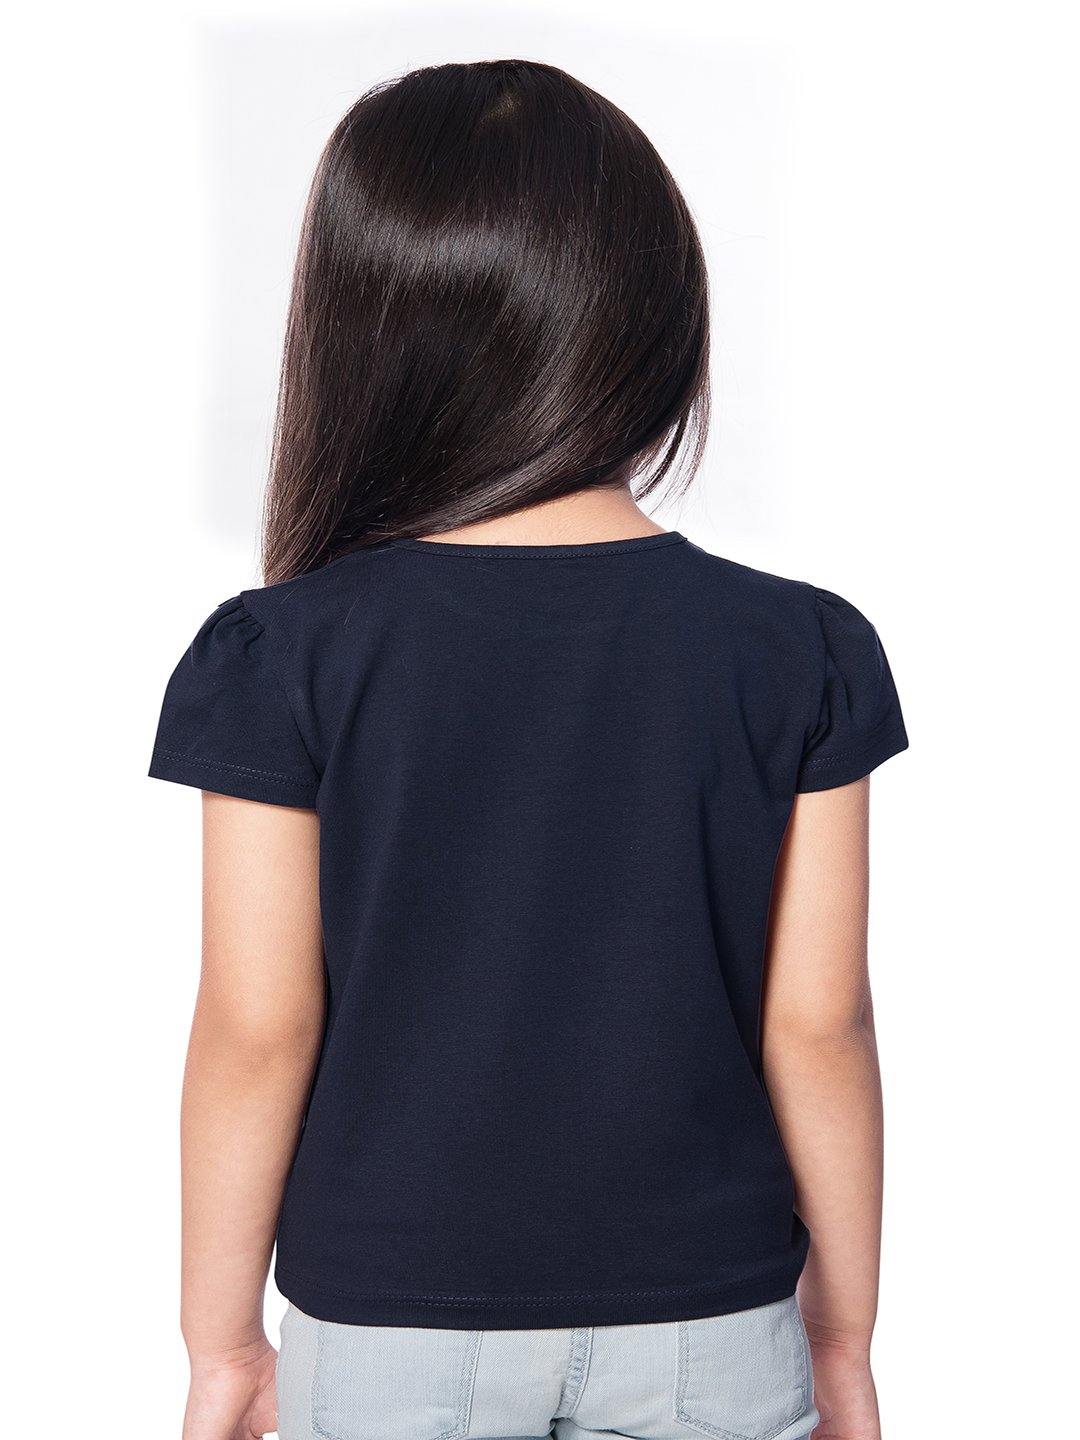 Tiny Baby Navy Blue Colored Top - T-110 Navy Blue - TINY BABY INDIA shop.tinybaby.in